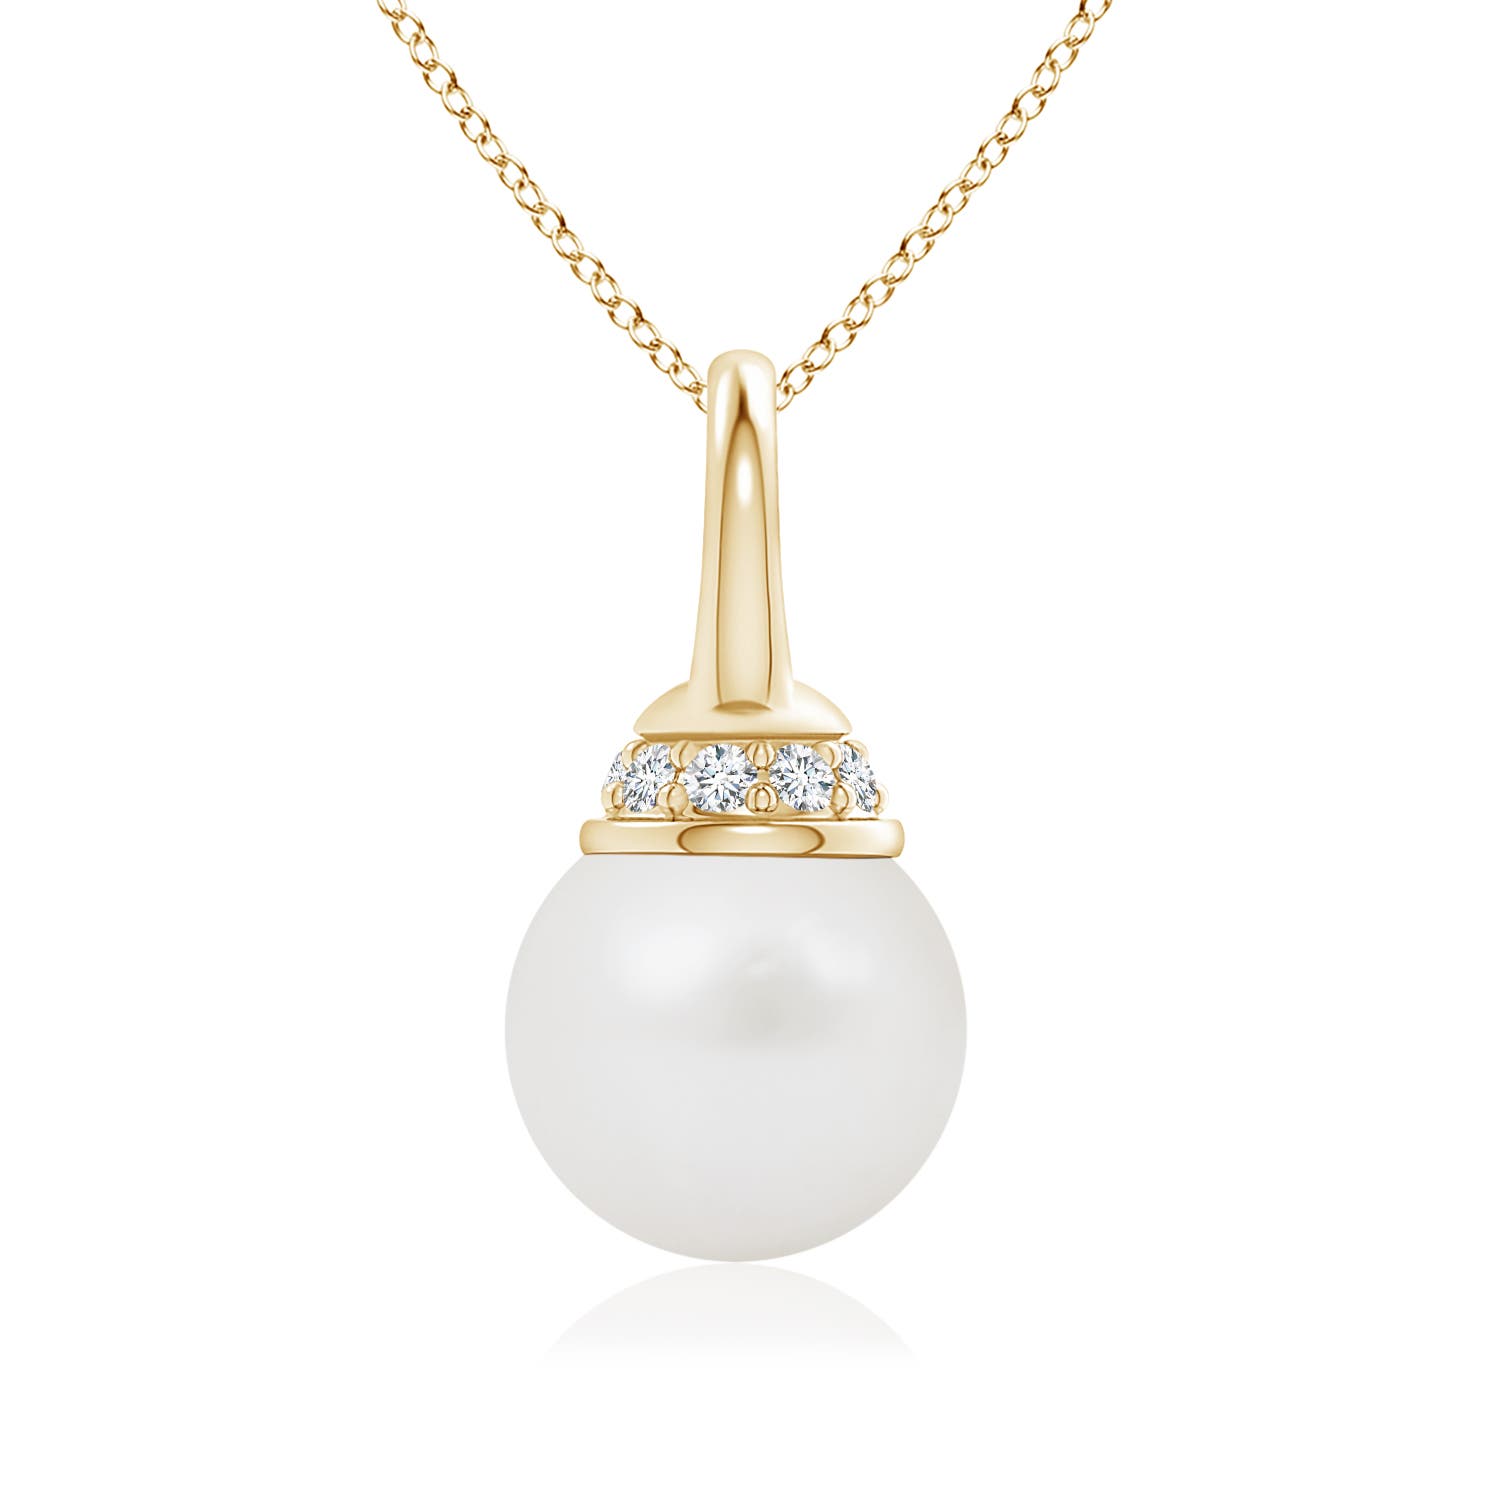 A - South Sea Cultured Pearl / 3.79 CT / 14 KT Yellow Gold